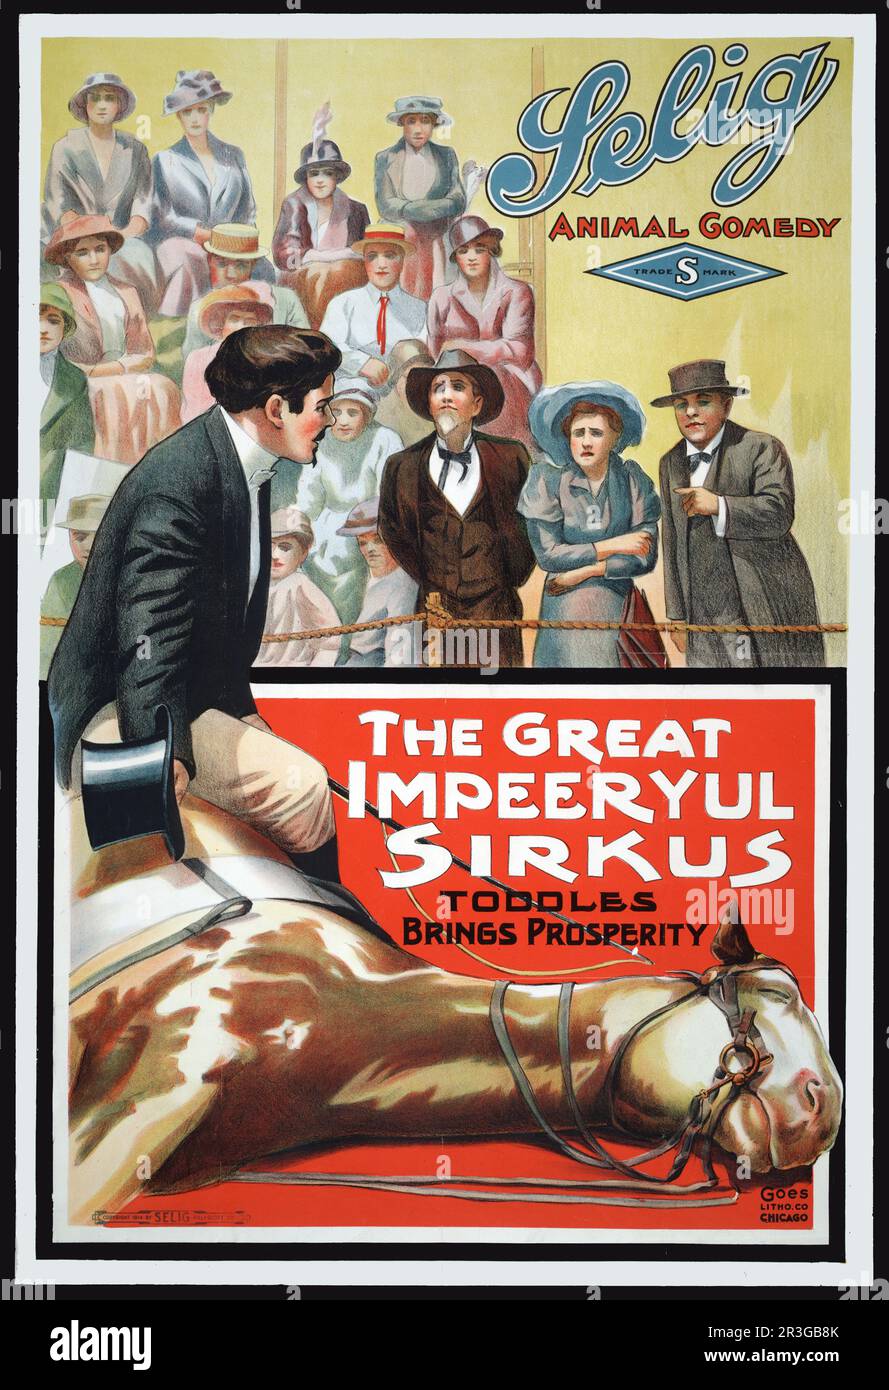 Motion picture poster for The Great Impeeryul Sirkus, showing a ringmaster sitting on a horse with spectactors looking on. Stock Photo